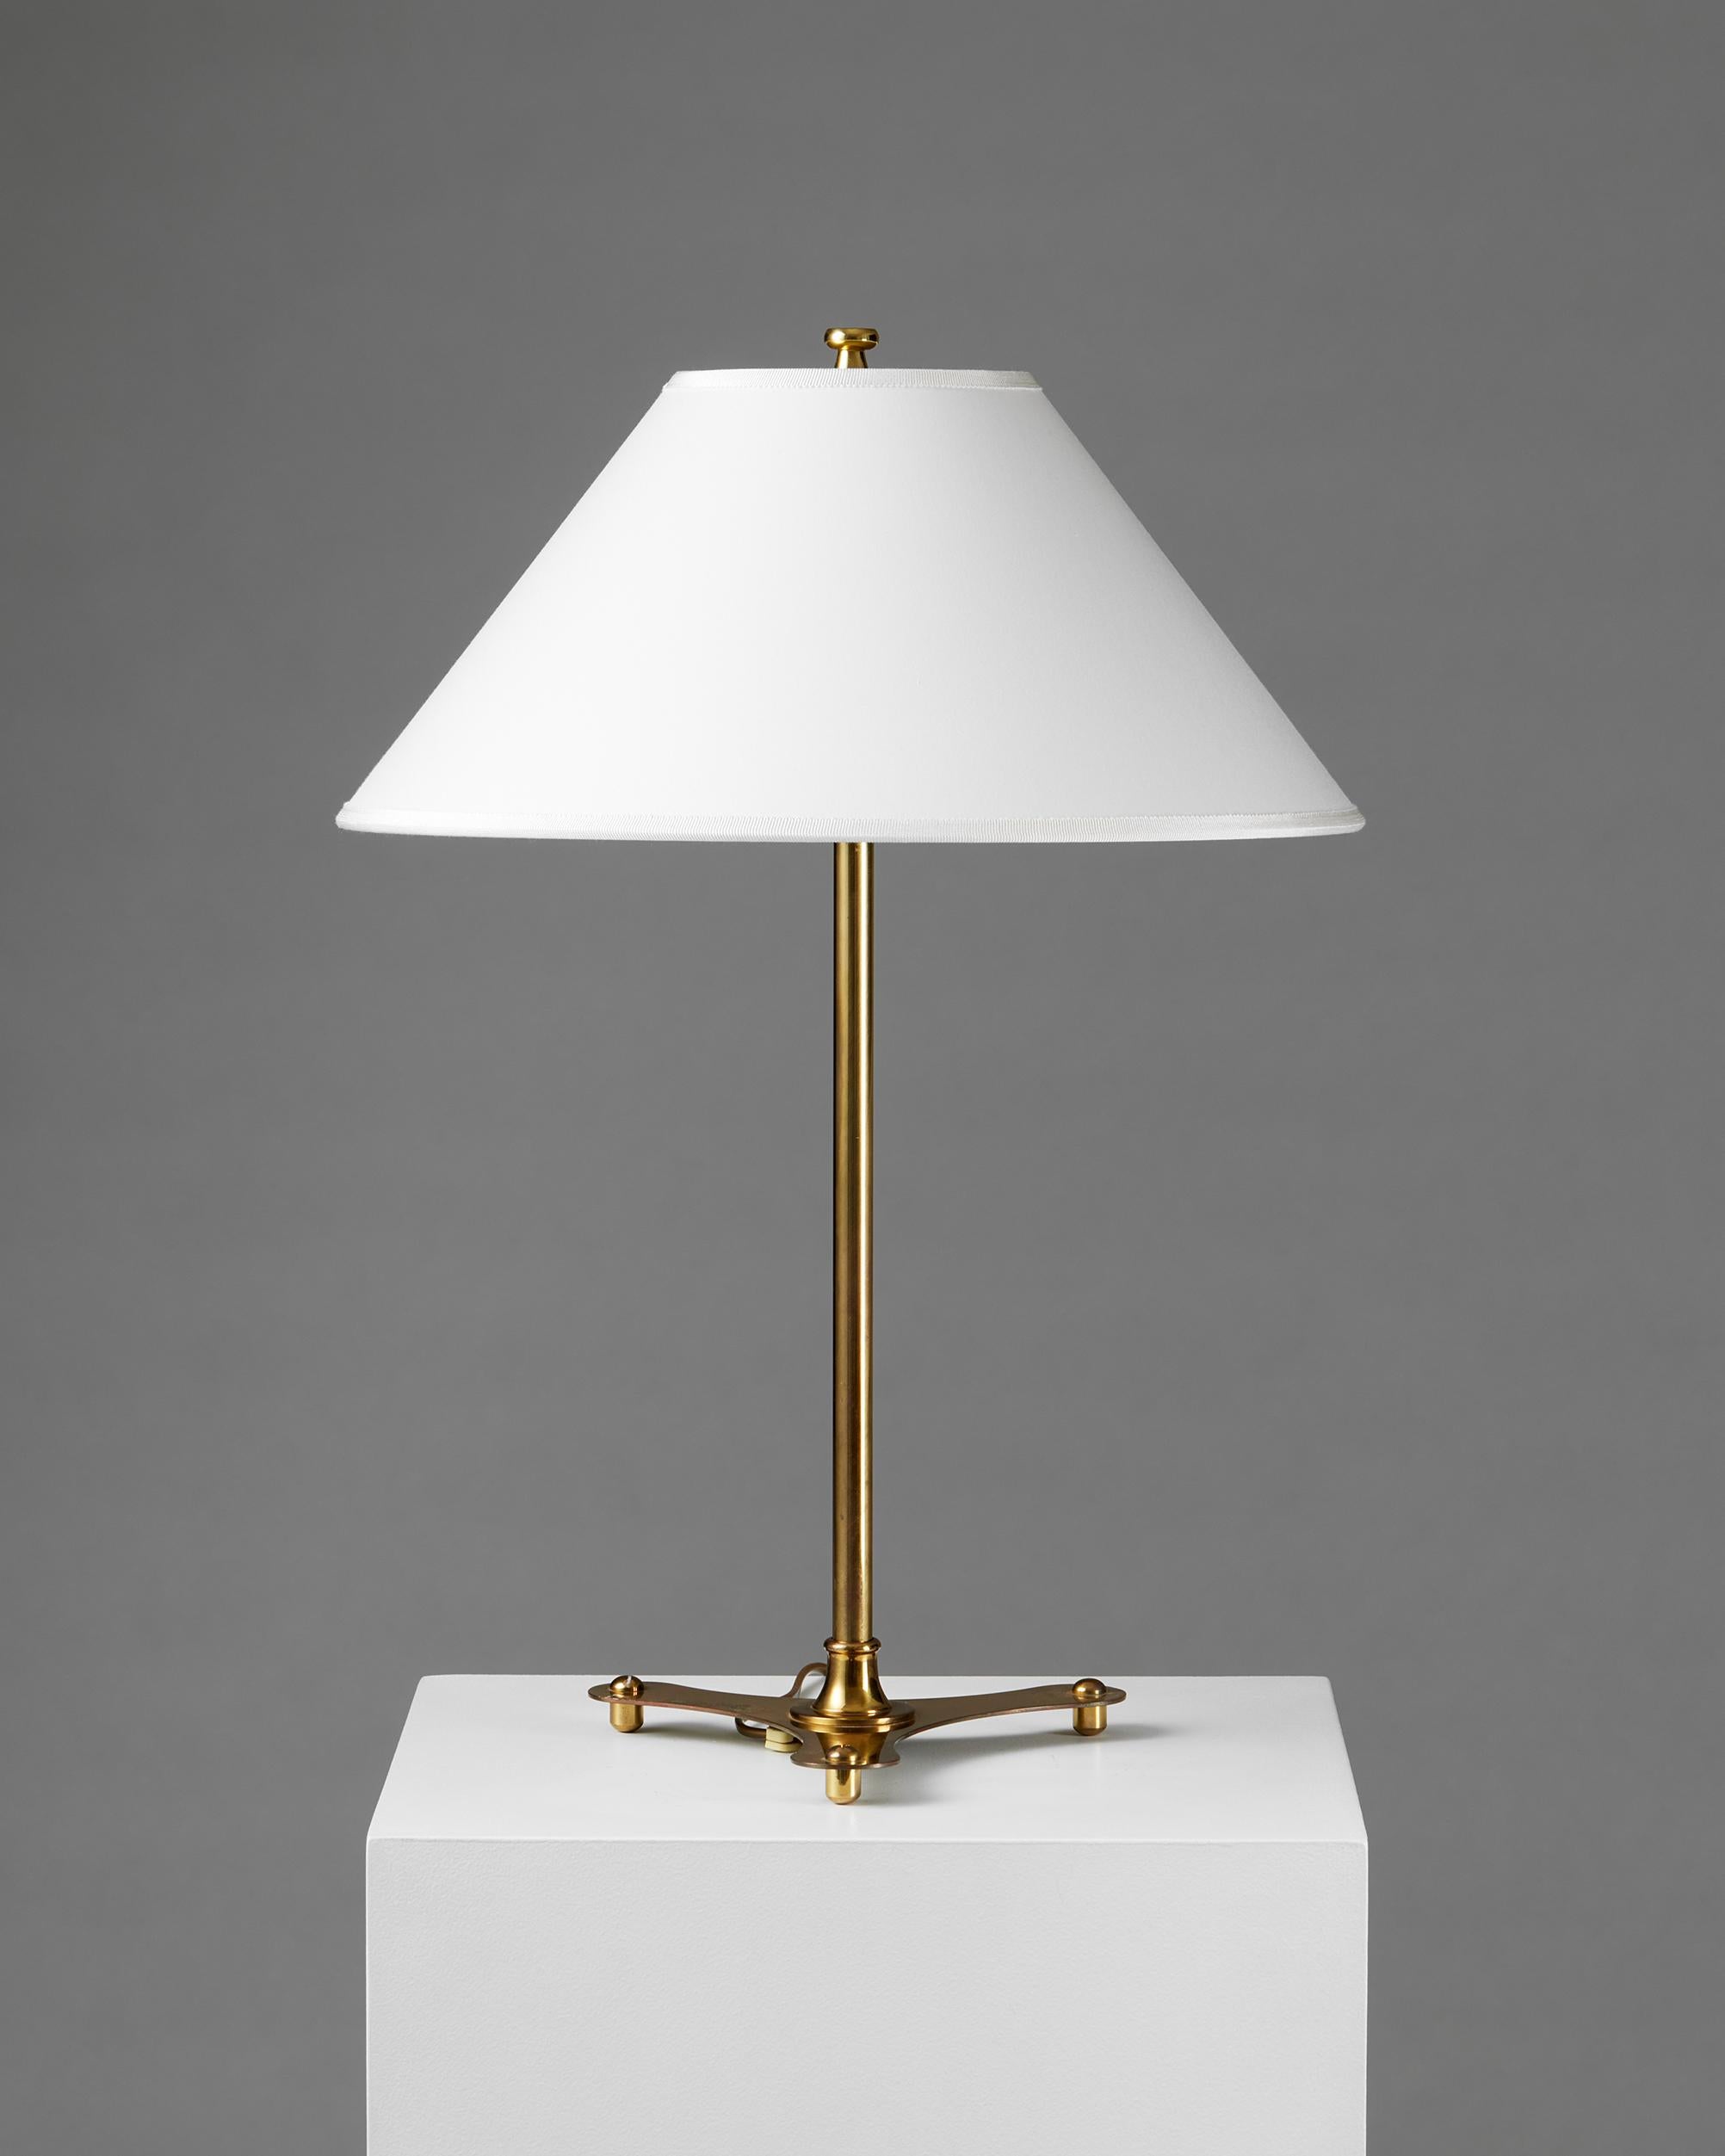 Table lamp model 2552 designed by Josef Frank for Svenskt Tenn, Sweden, 1950s

Stamped.

Brass and textile.

Josef Frank was a true European, he was also a pioneer of what would become classic 20th century Swedish design and the “Scandinavian Design